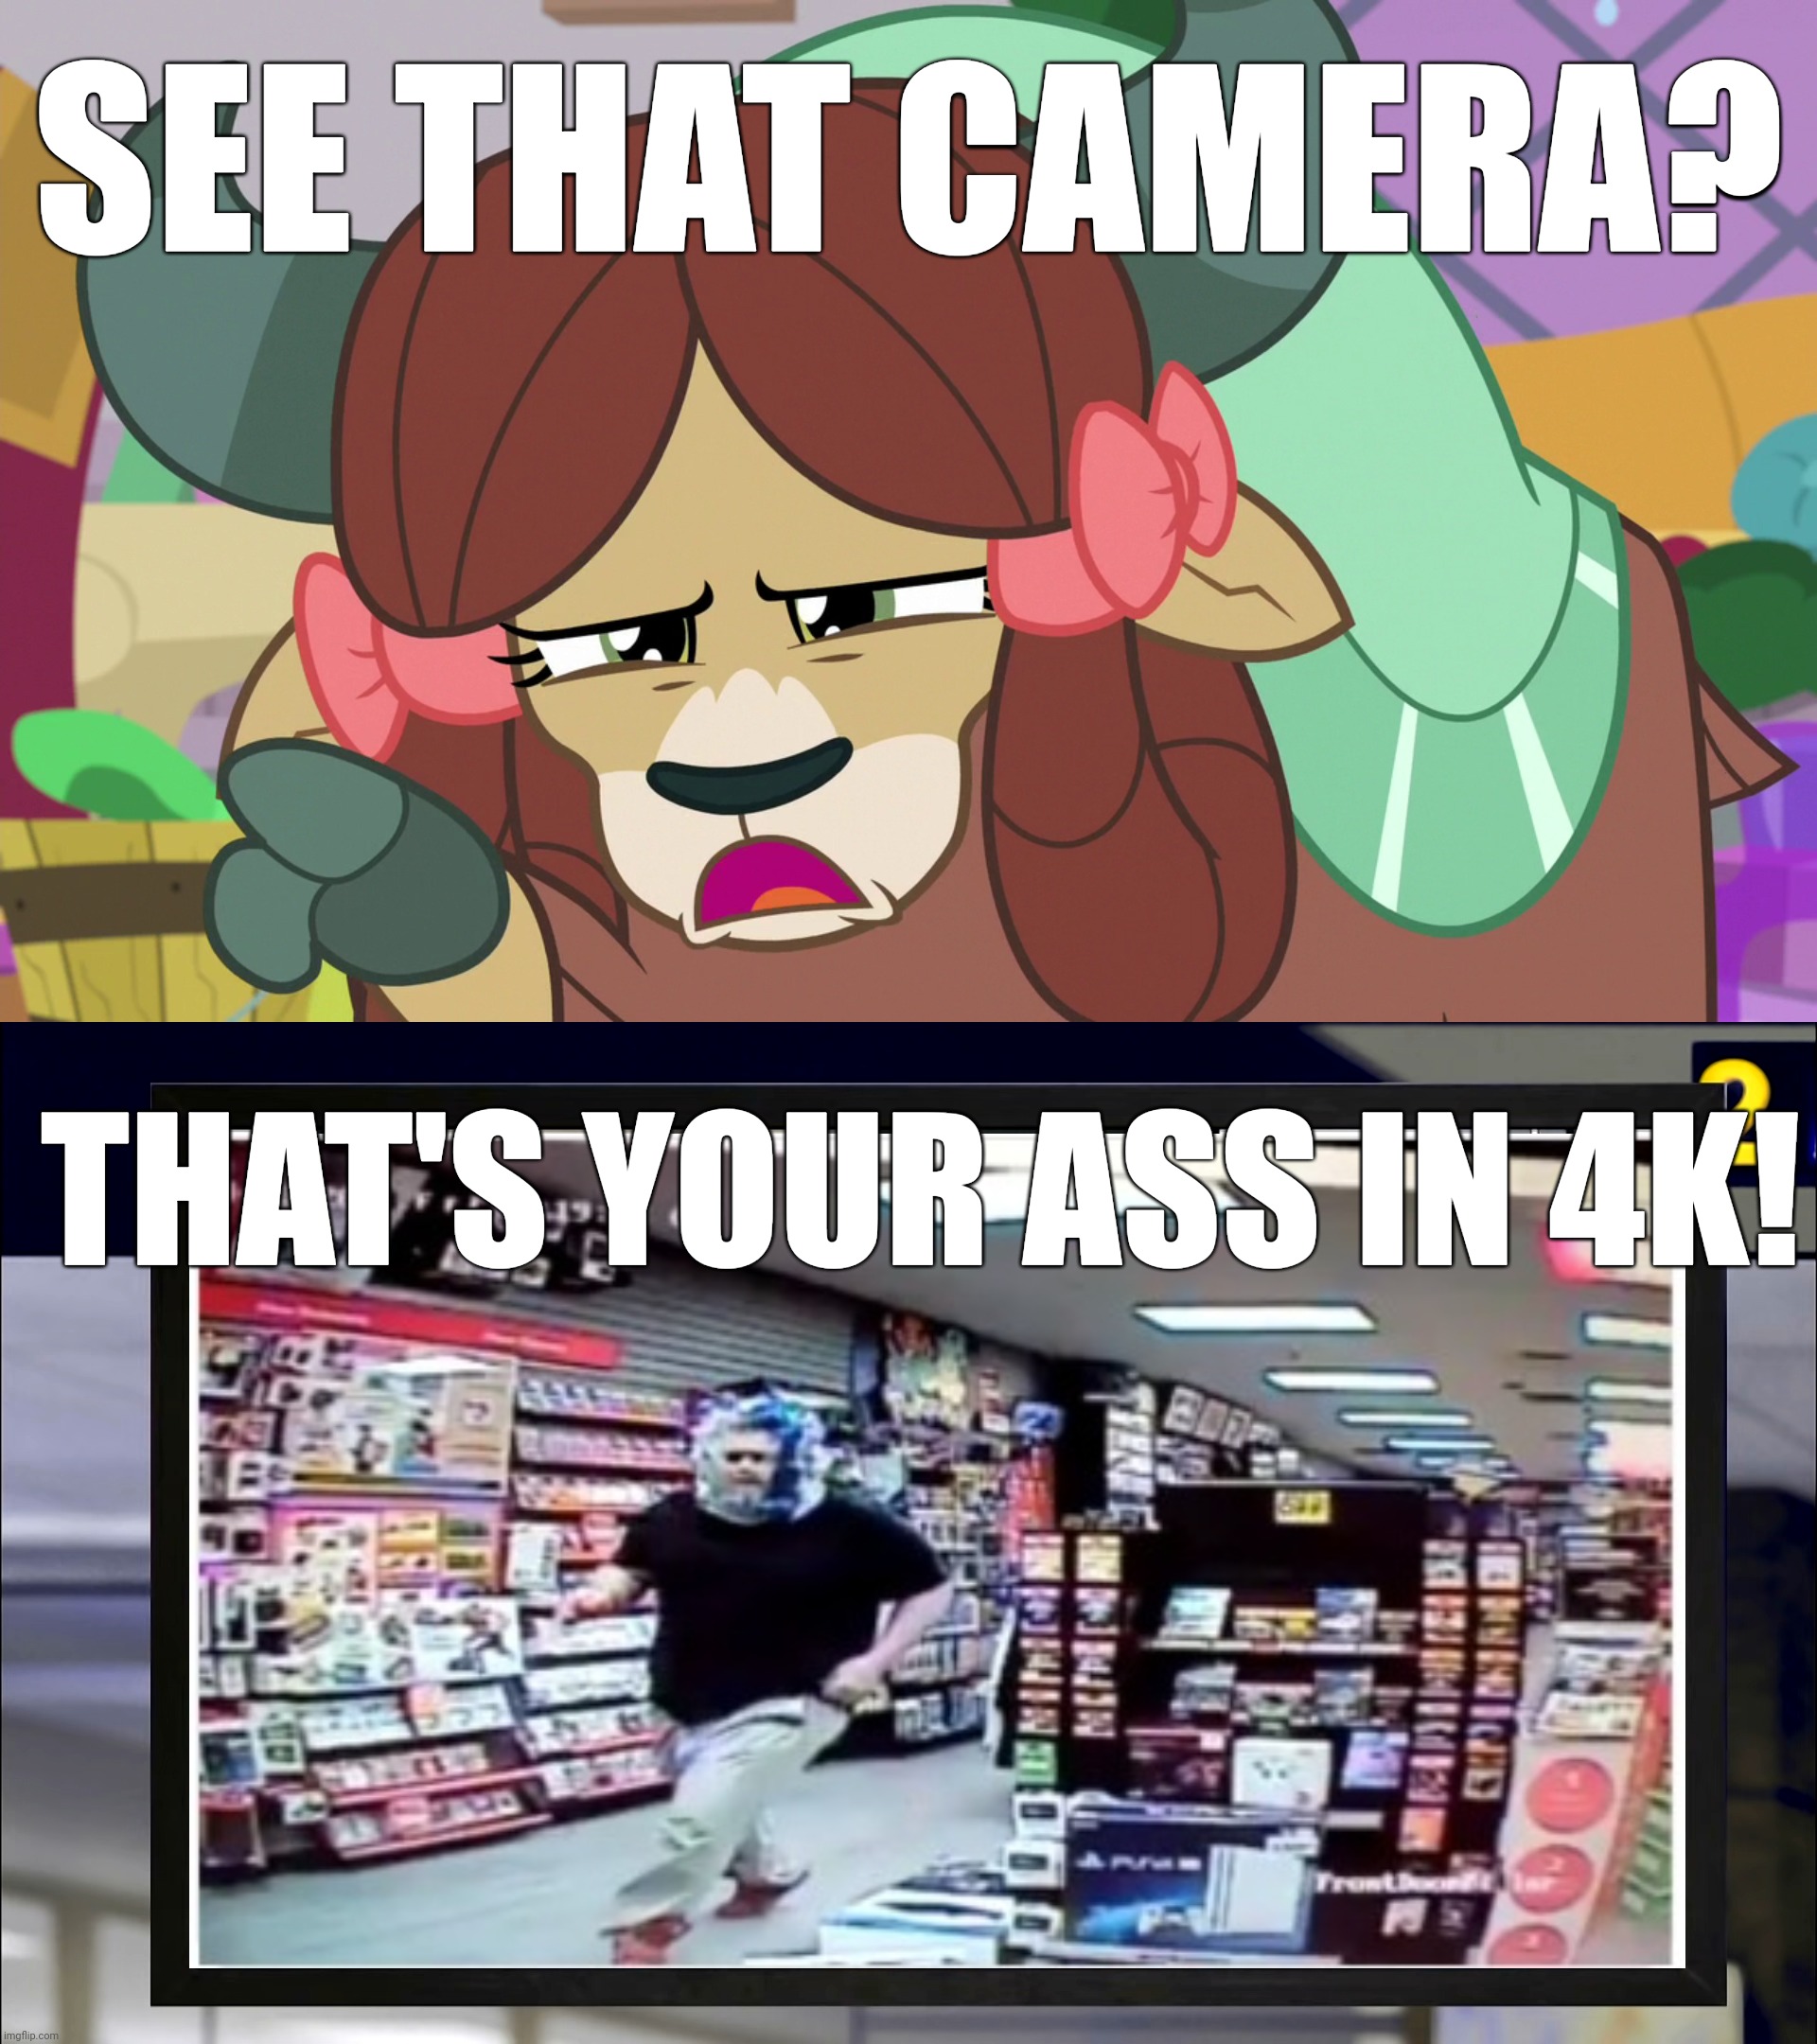 SEE THAT CAMERA? THAT'S YOUR ASS IN 4K! | made w/ Imgflip meme maker